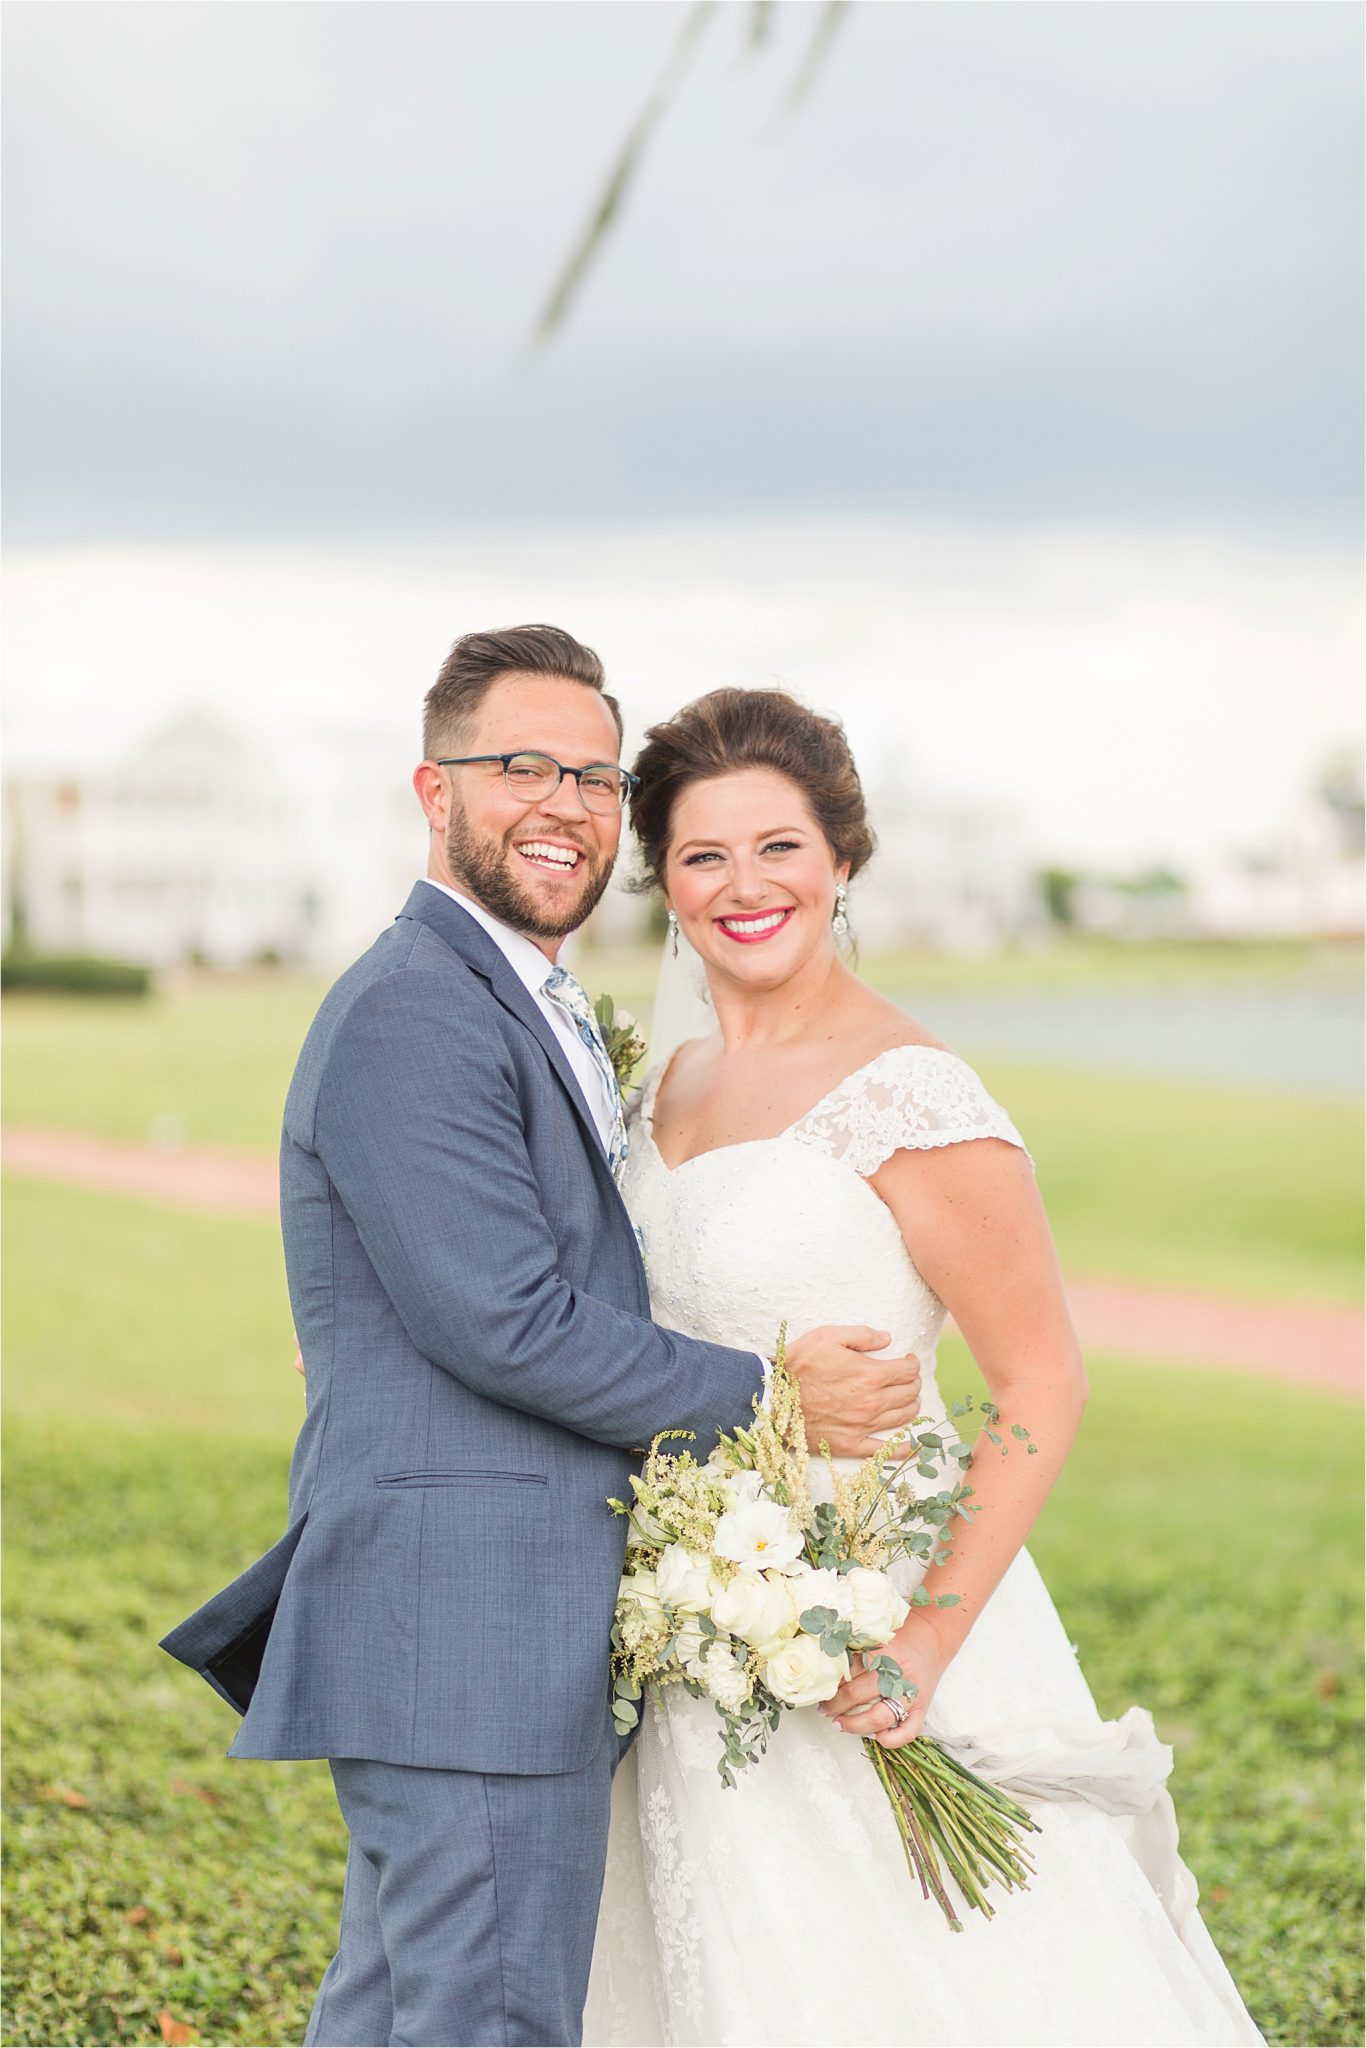 Pastel Themed Wedding-The Chapel at the Waters-Montgomery Alabama Photographer-Miles & Meredyth-Blue Themed Wedding-Bride Bouquet-Wedding Dress-Groom-Bride